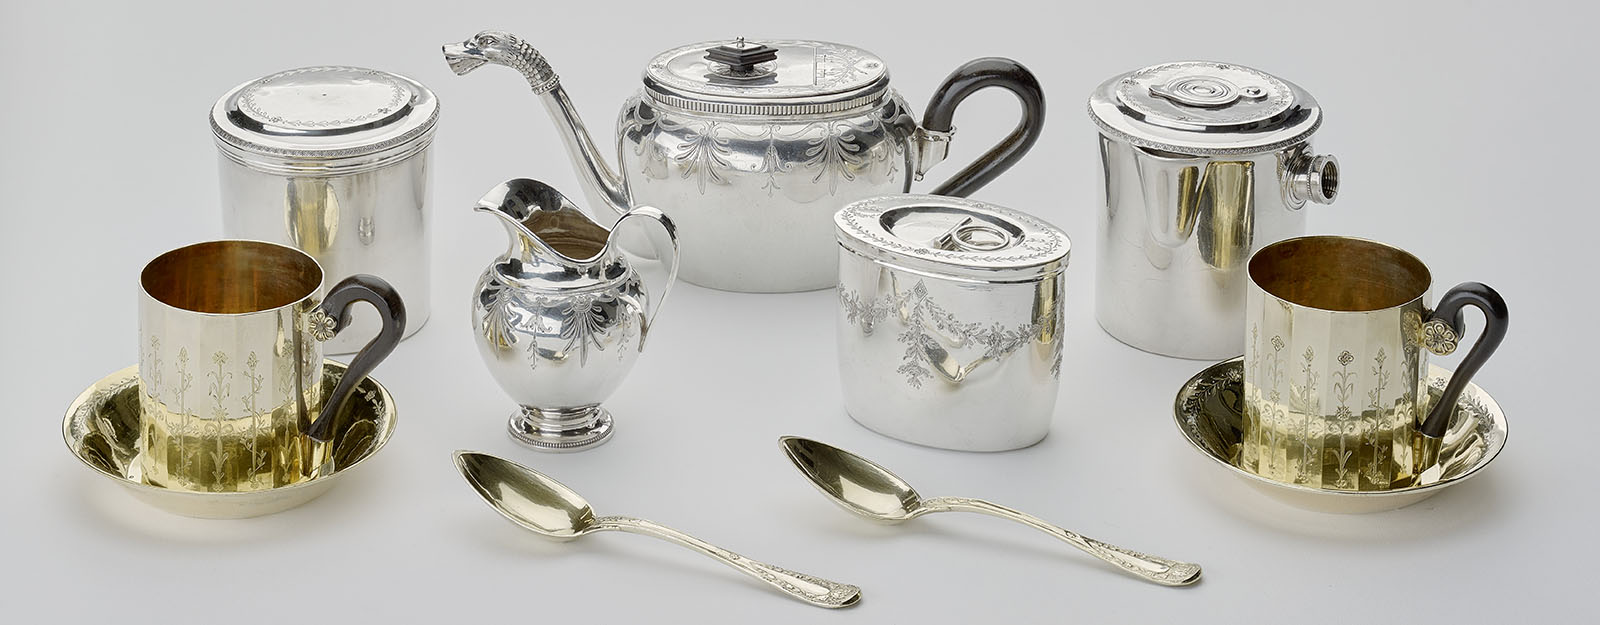 A selection of silver cups, tea pot and spoons.